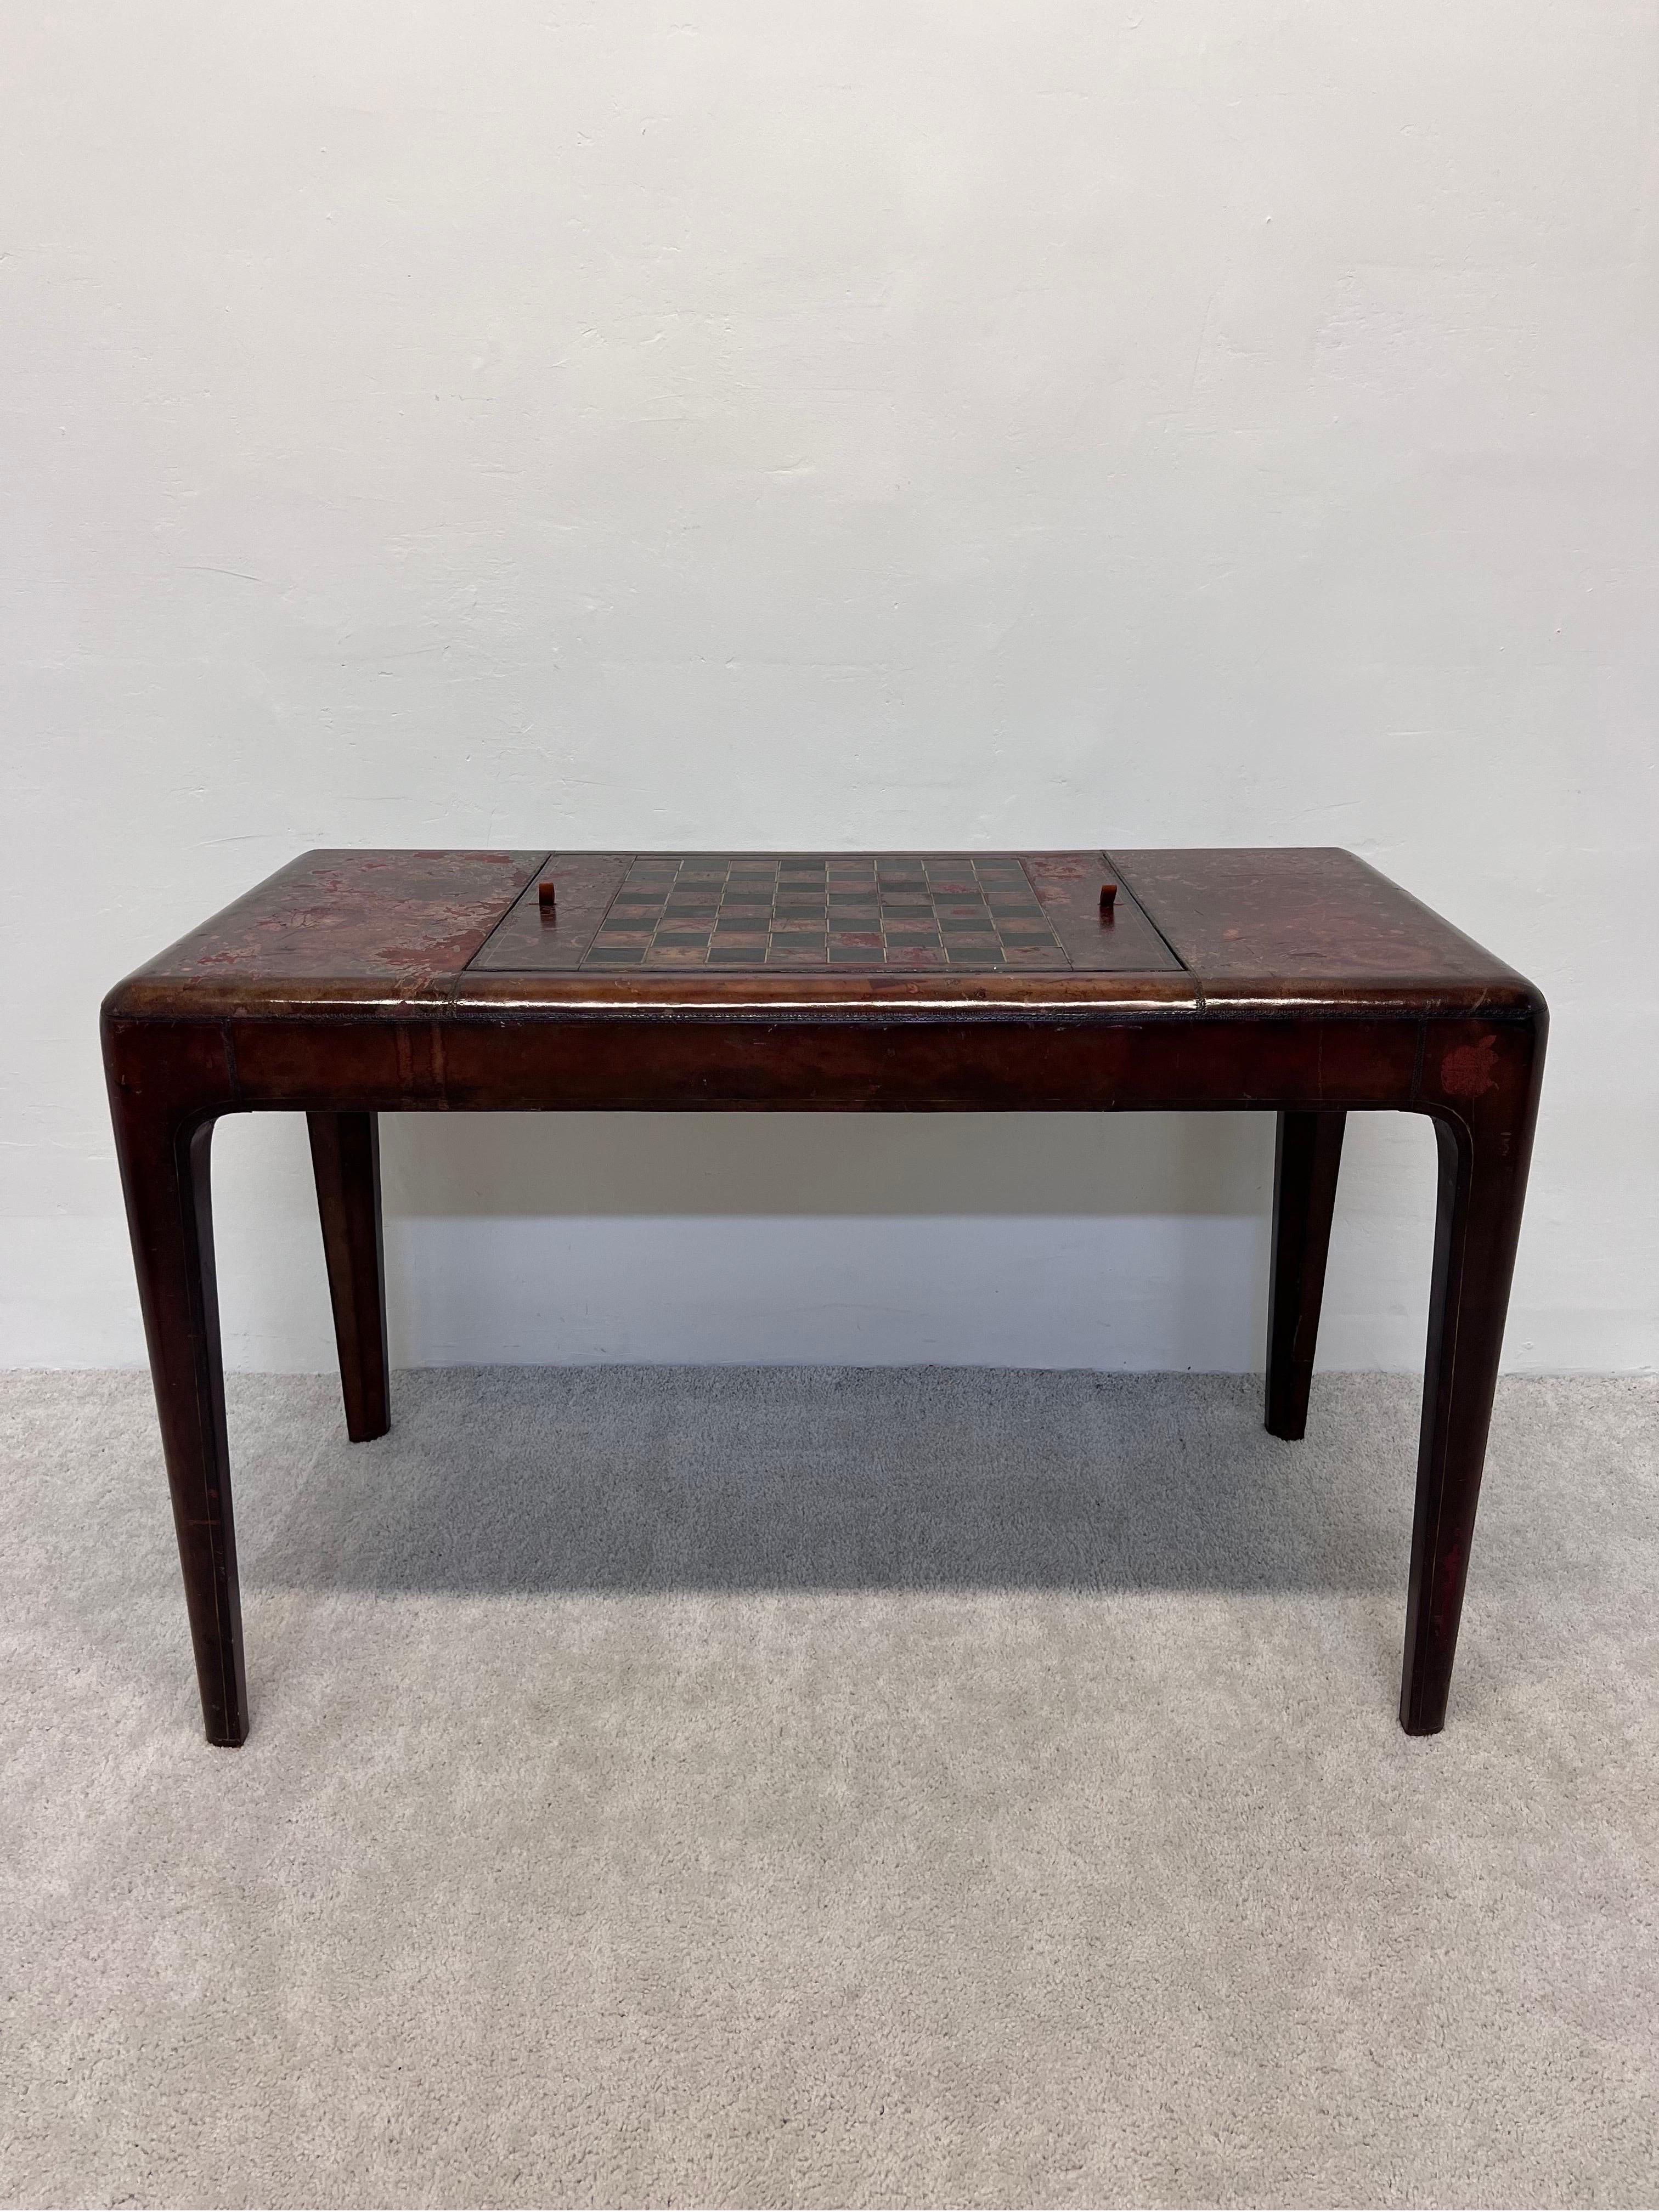 20th Century Mid-Century Modern Maitland Smith Distressed Leather Game Table